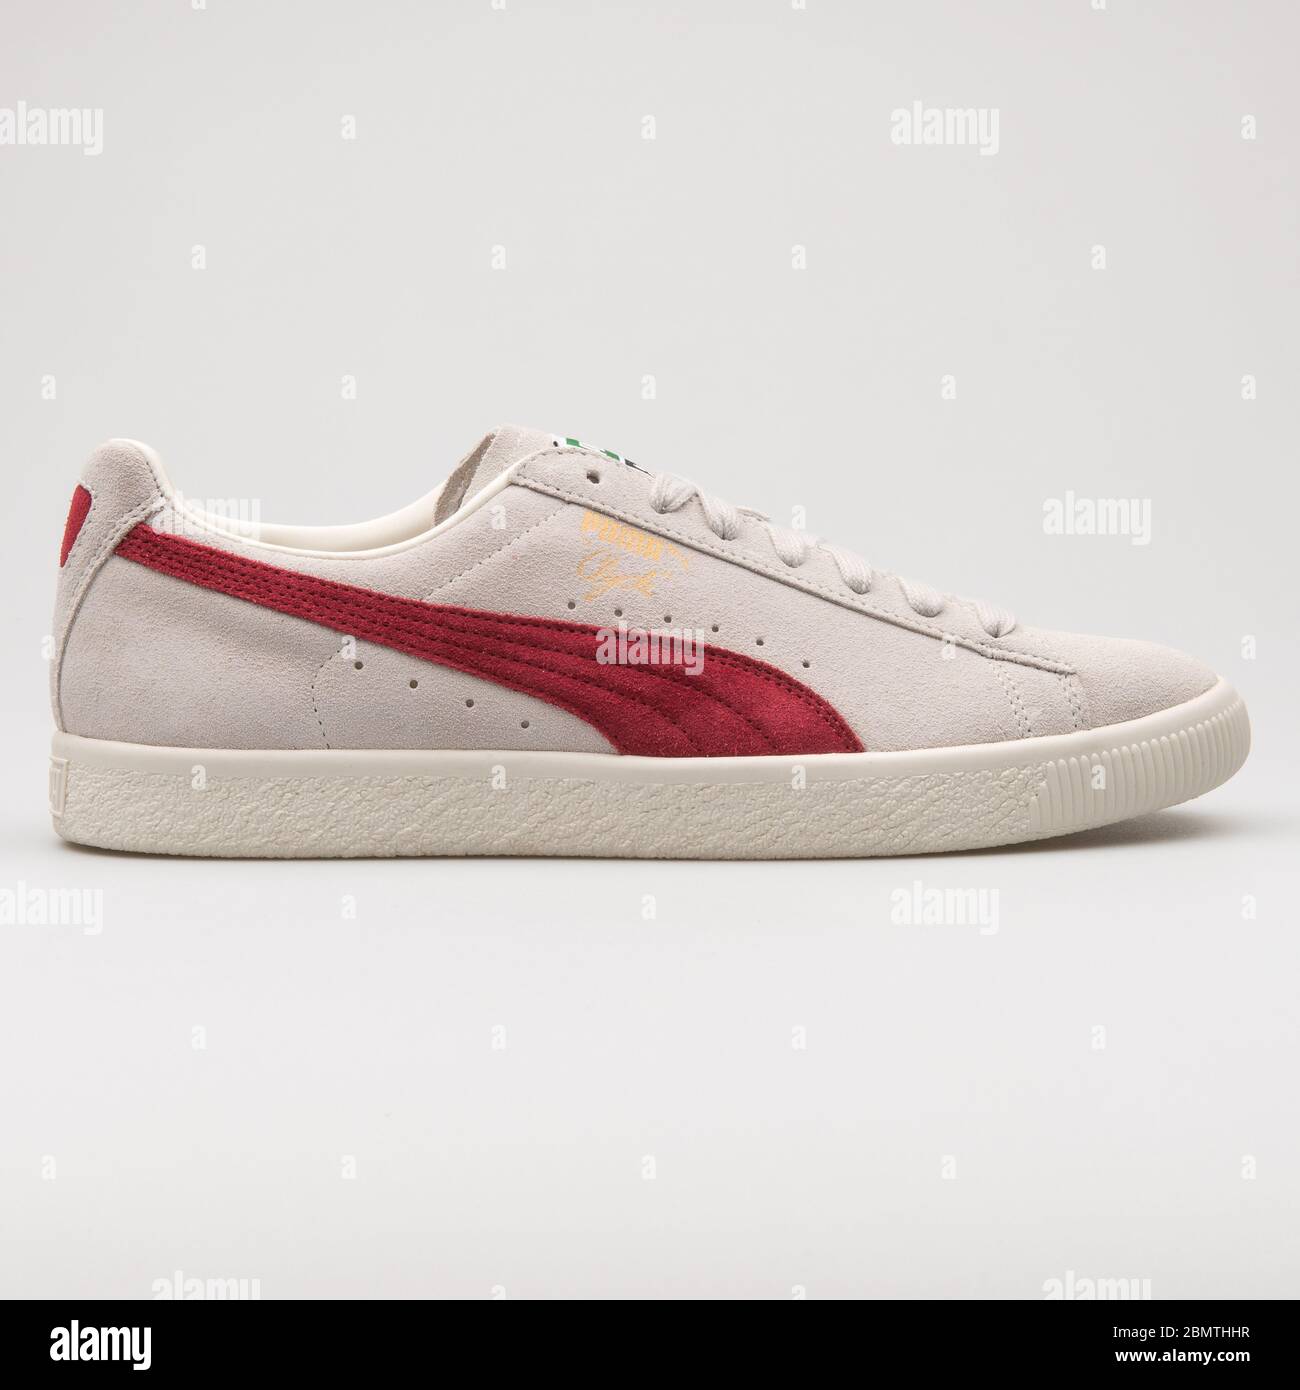 VIENNA, AUSTRIA - JANUARY 12, 2018: Puma Clyde From The Archive grey and  red sneaker on white background Stock Photo - Alamy